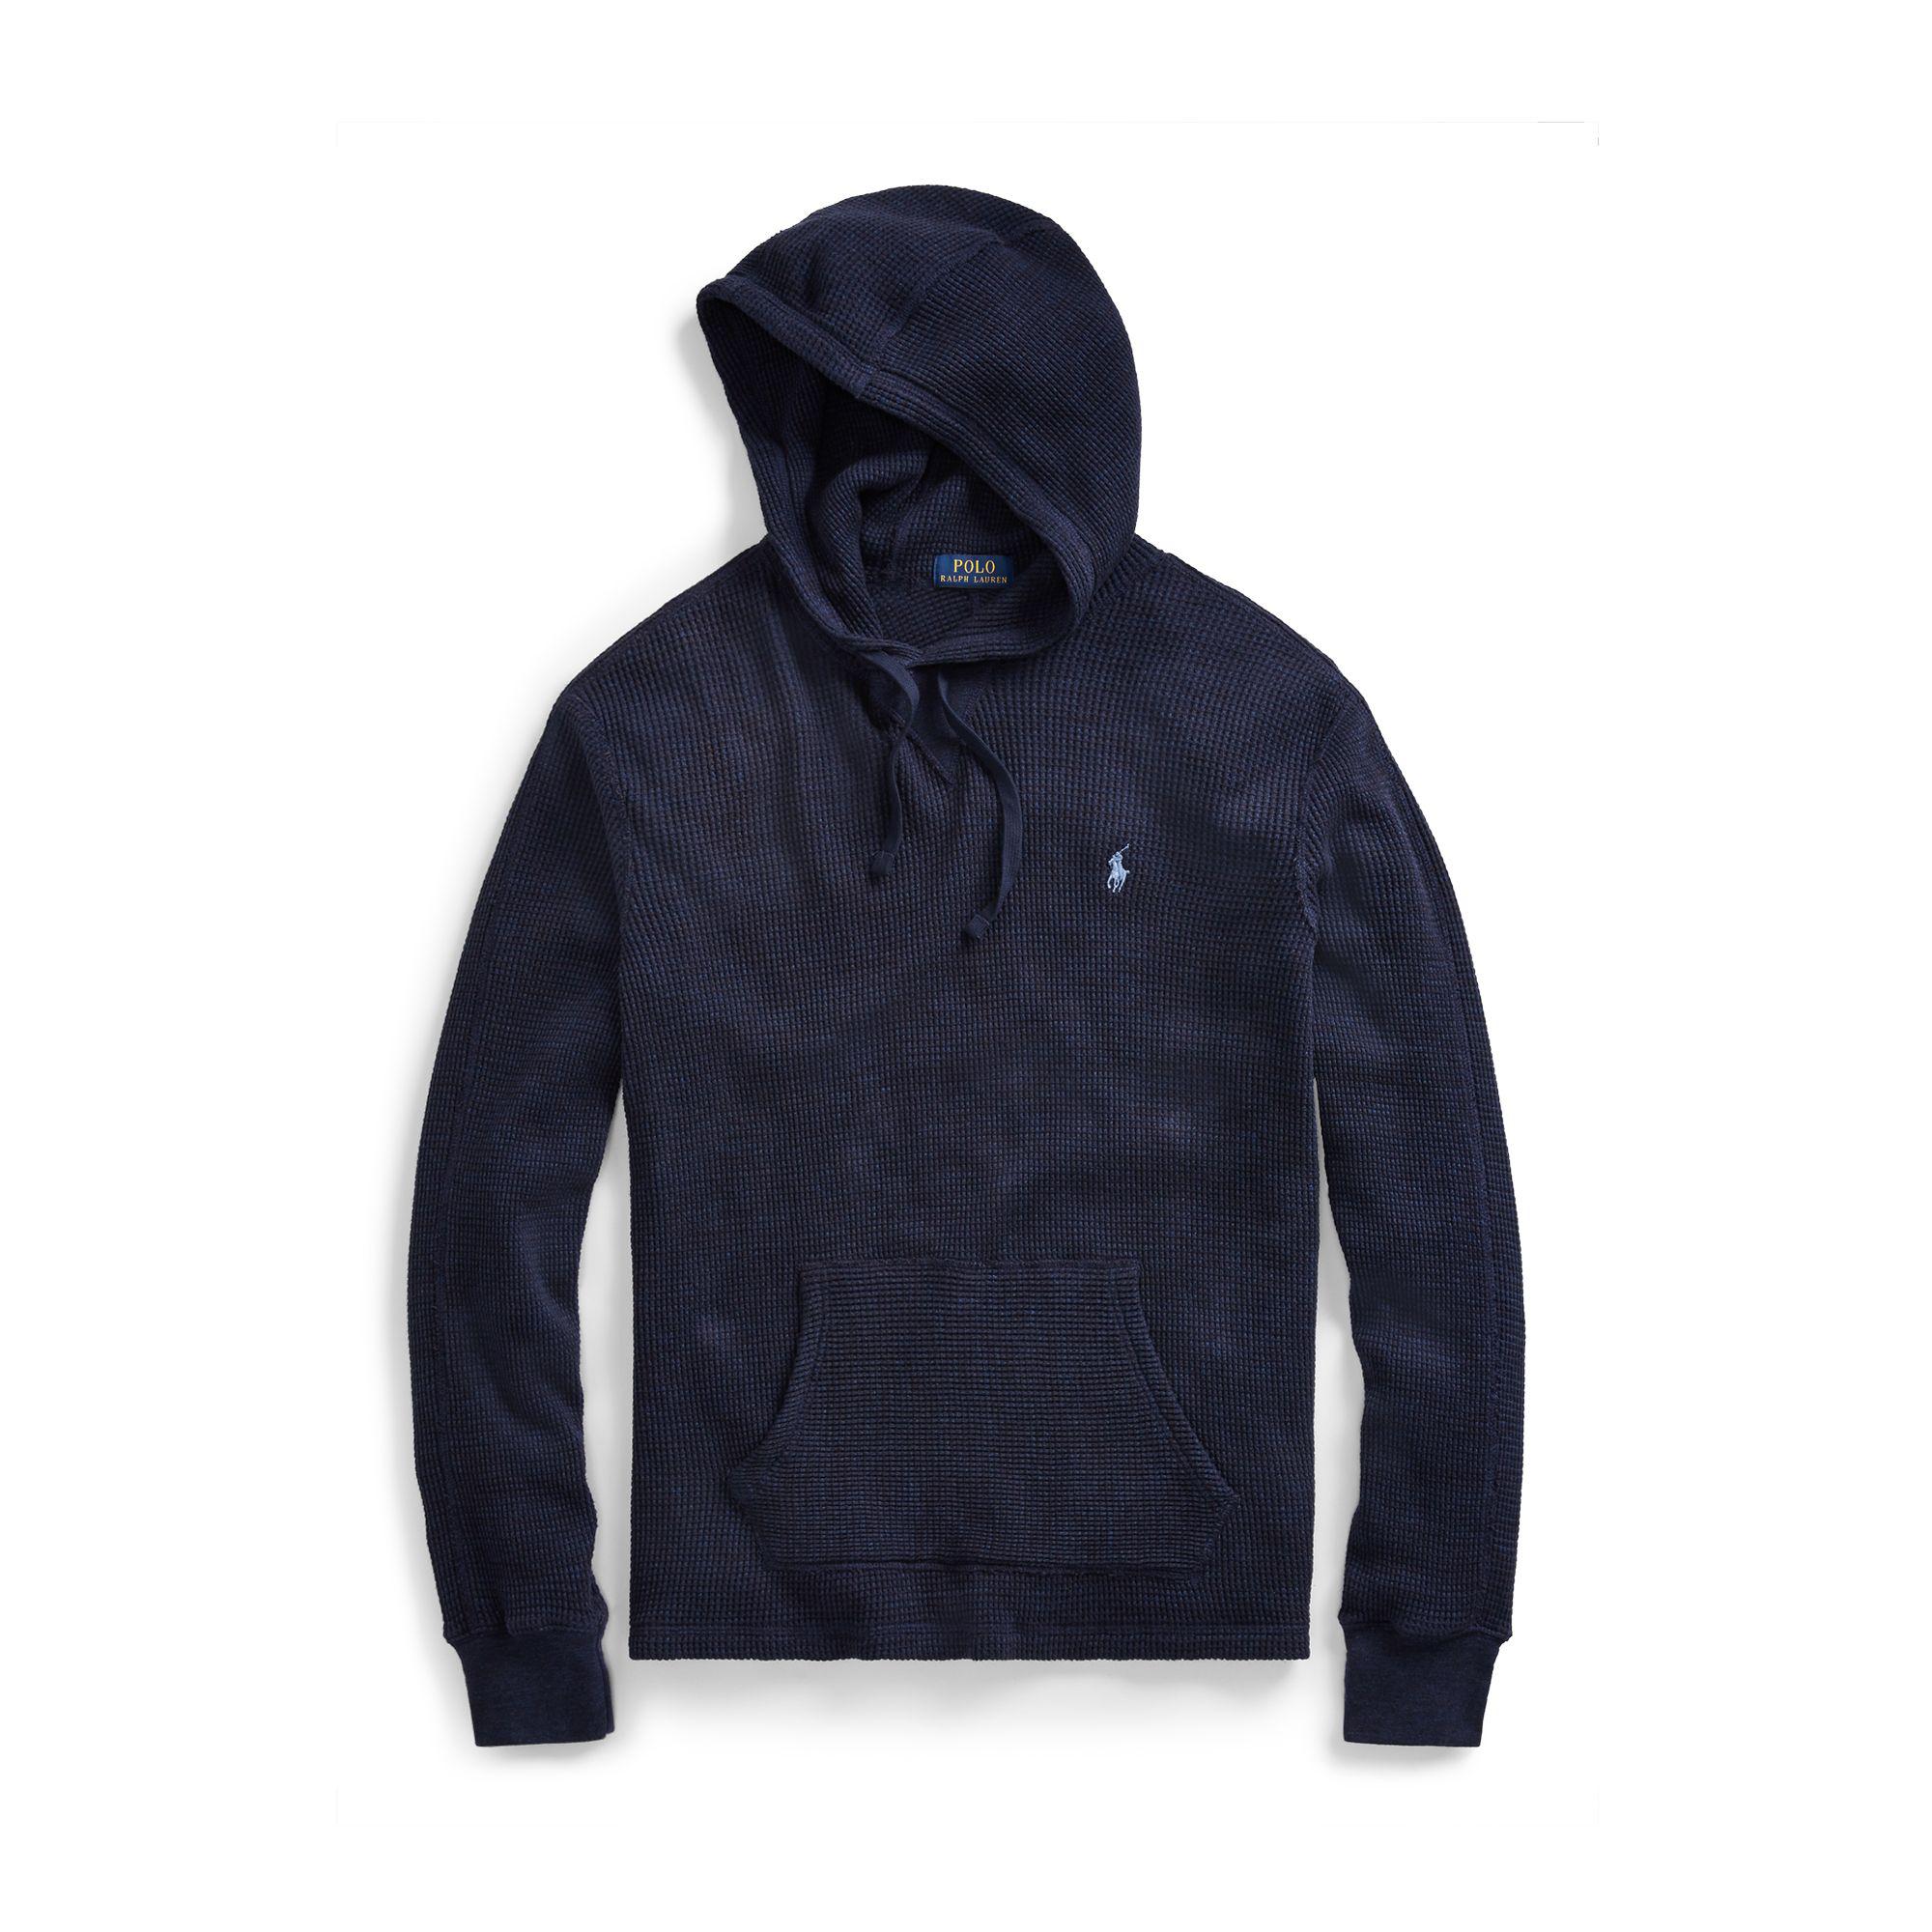 Polo Ralph Lauren Waffle-knit Cotton Hoodie in Blue for Men - Lyst